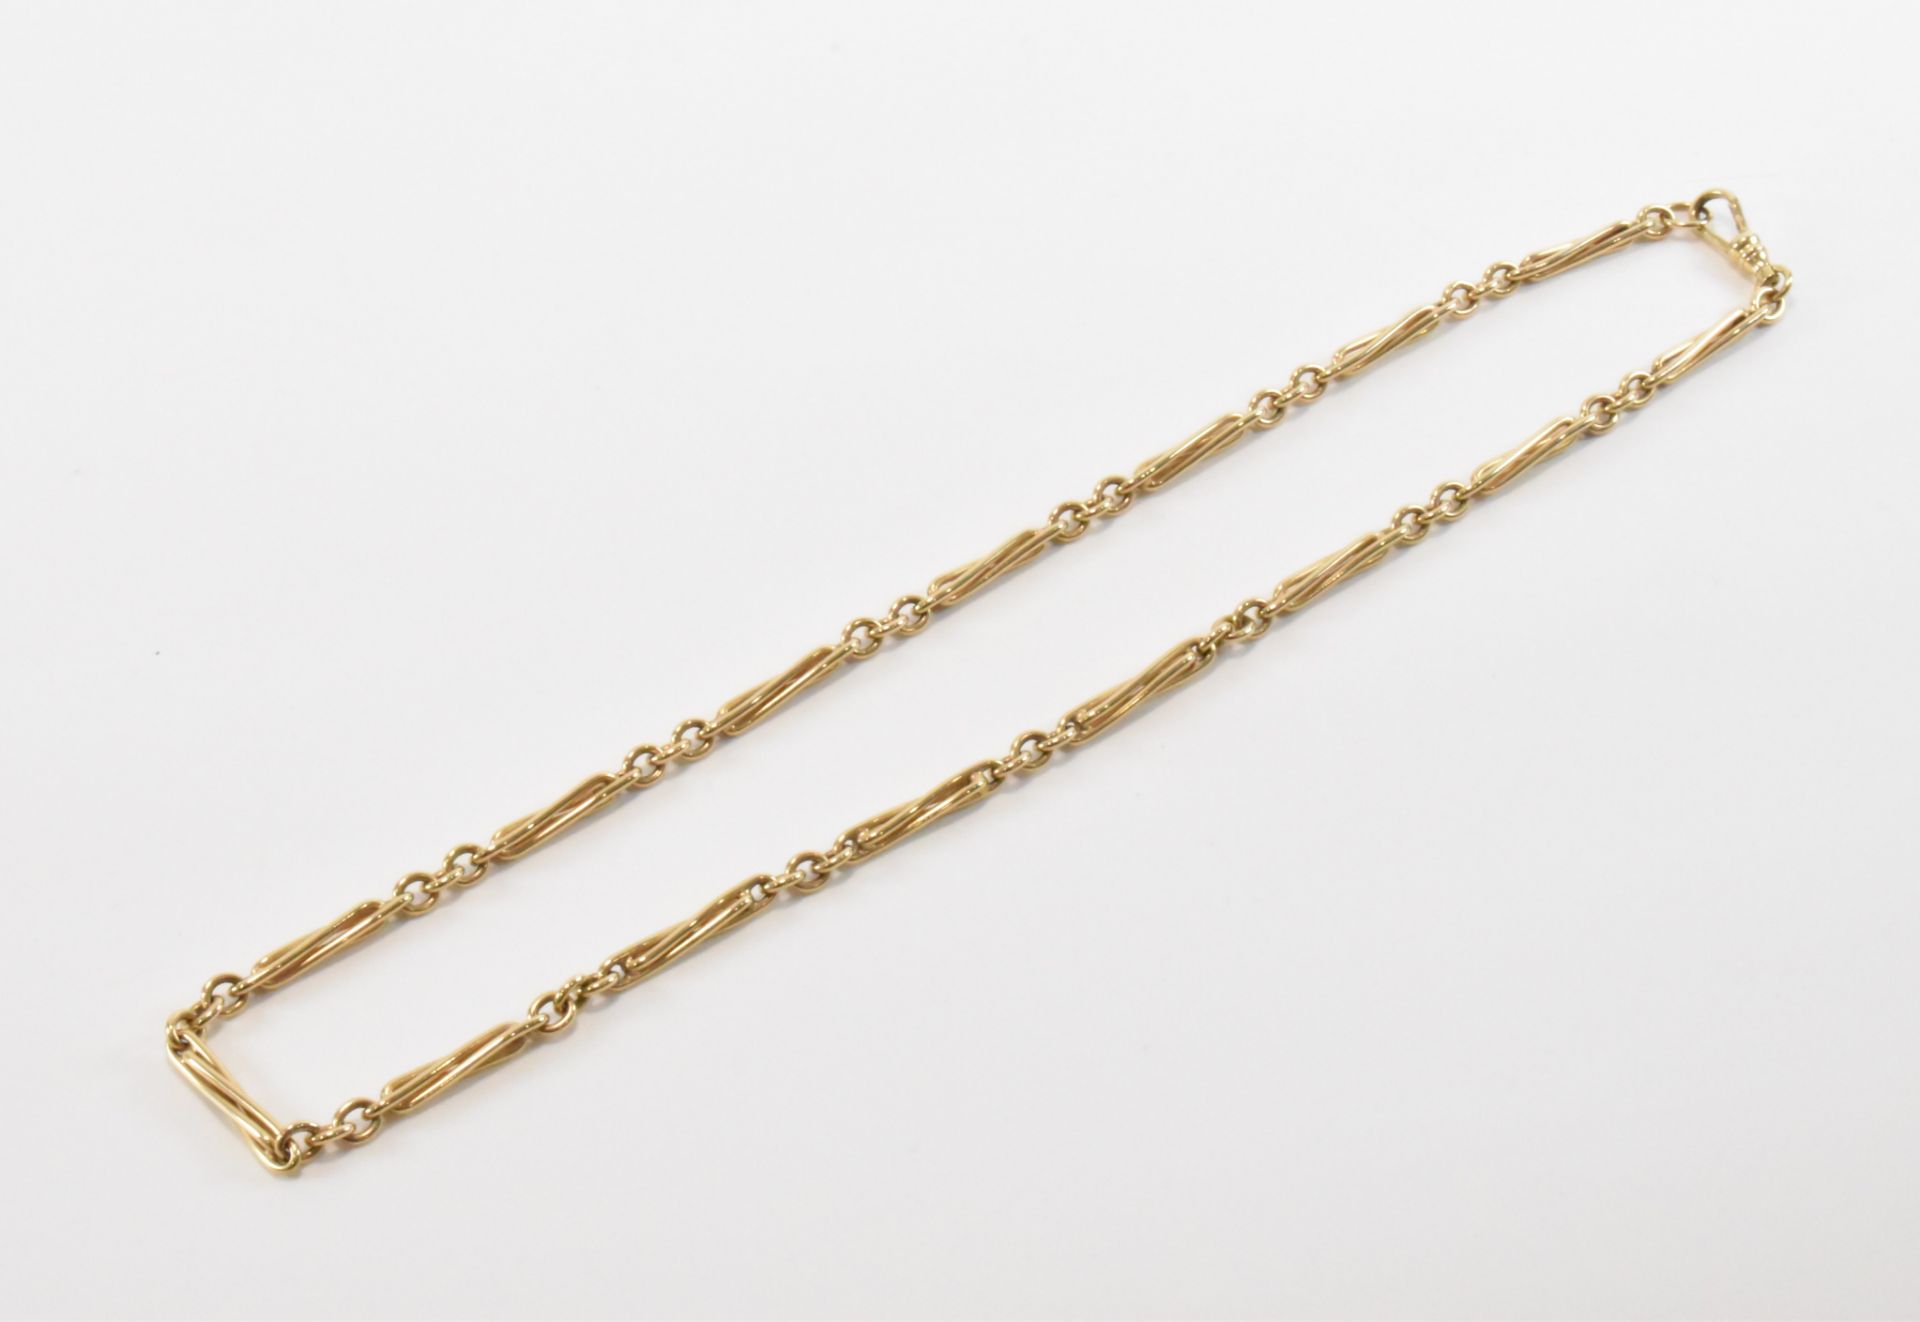 HALLMARKED 9CT GOLD FANCY LINK NECKLACE CHAIN - Image 3 of 4